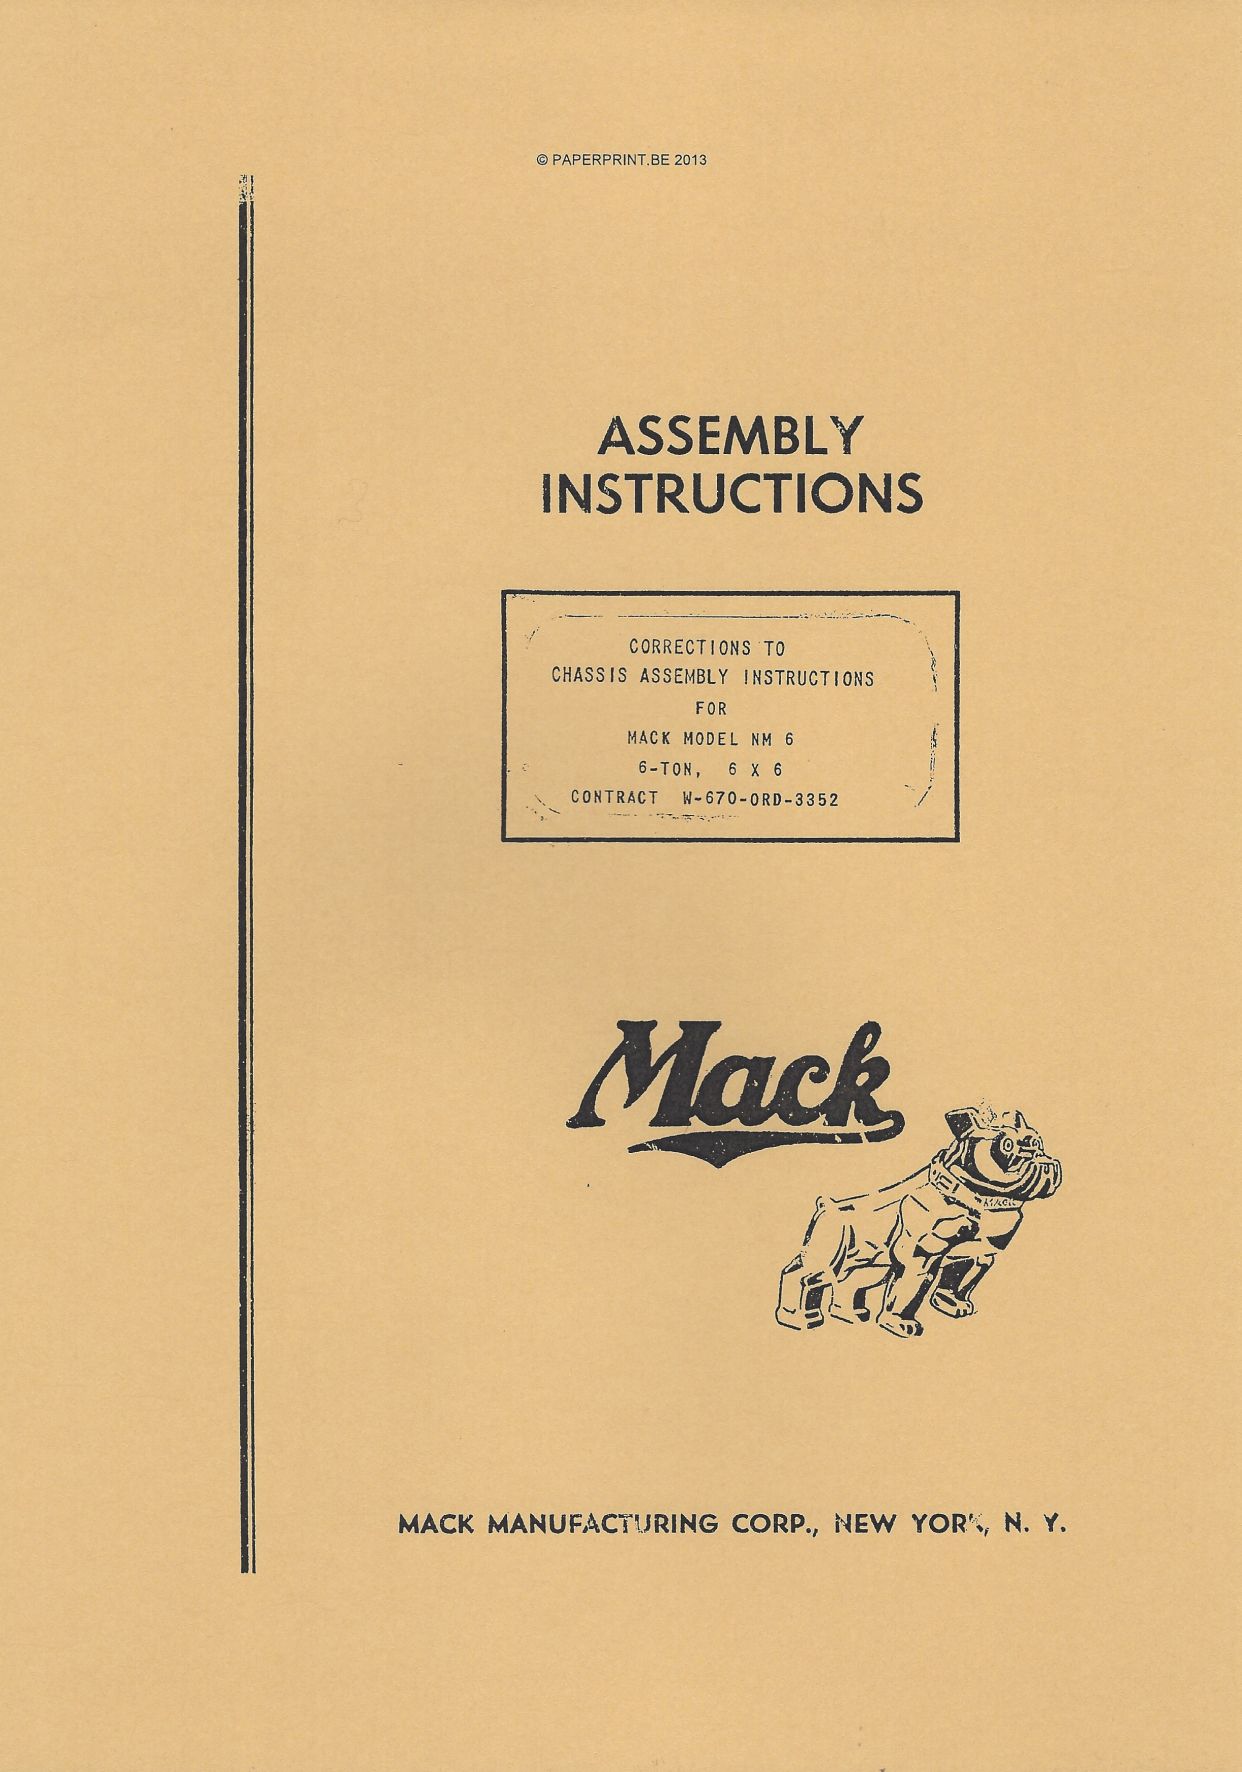 MACK NM ASSEMBLY INSTRUCTIONS